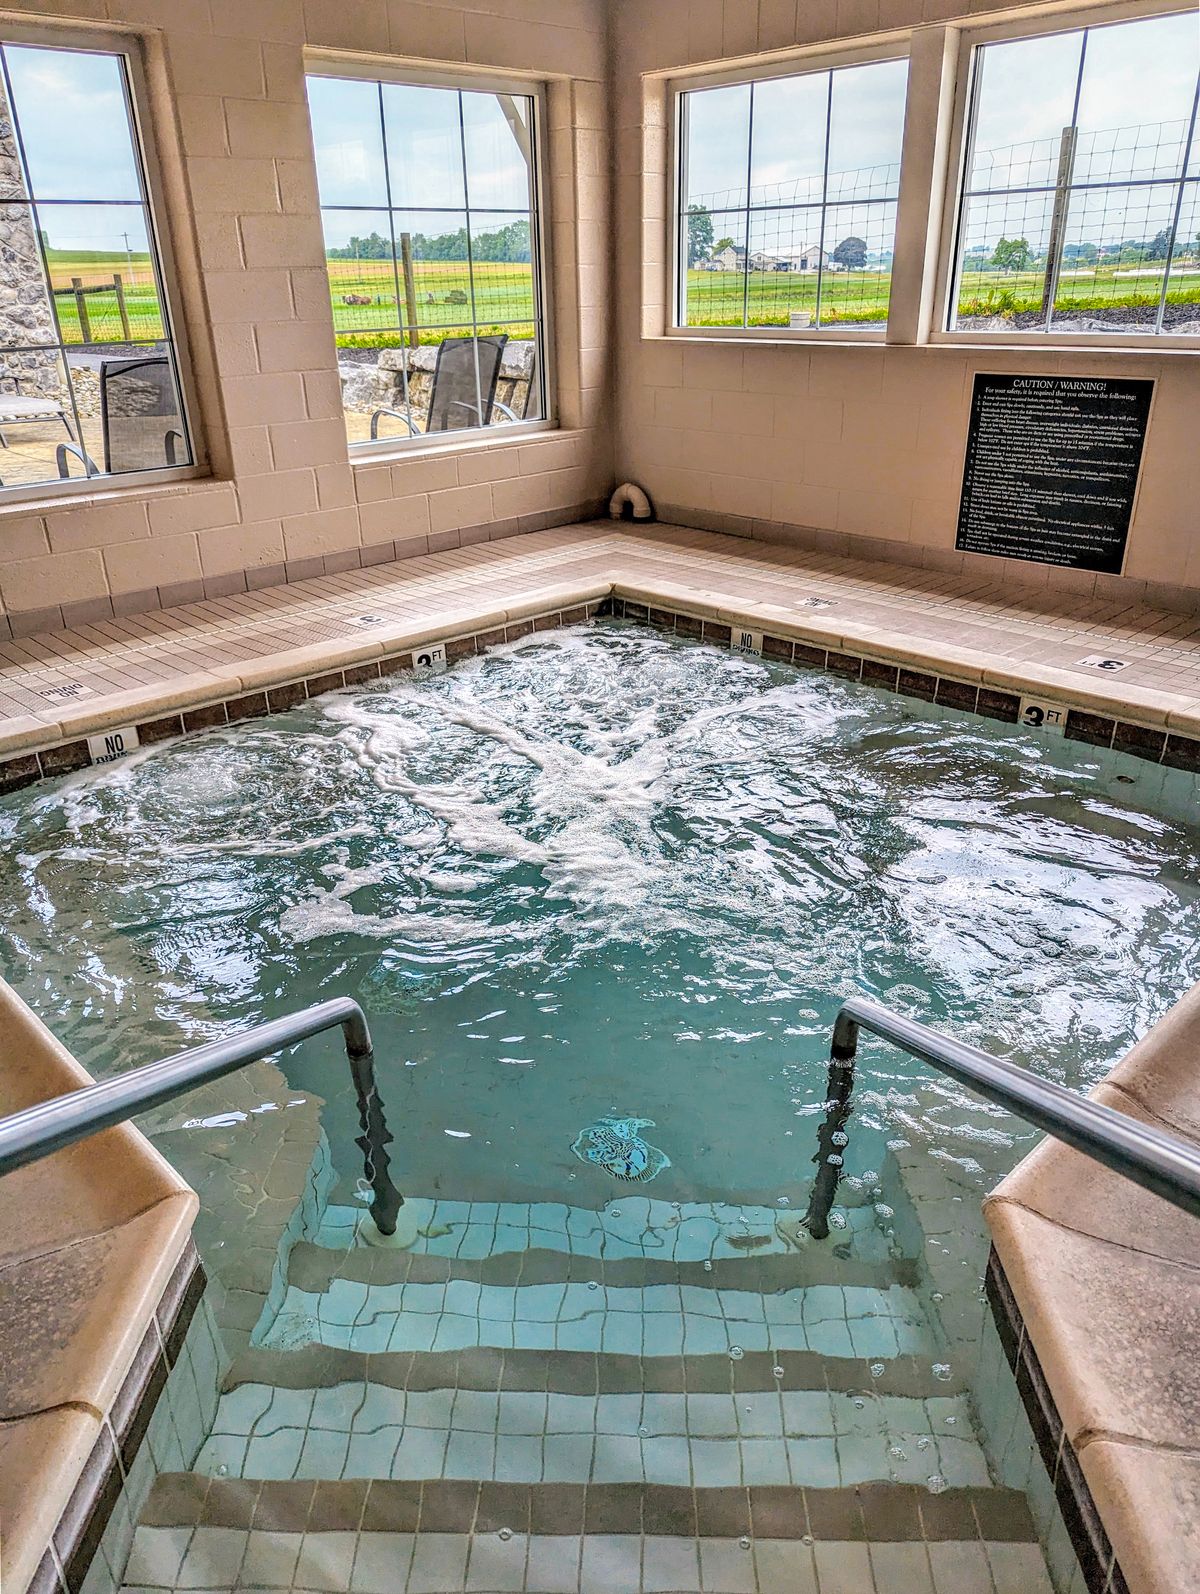 Interior view of a jacuzzi at Amish View Inn with agitated water. The jacuzzi is surrounded by beige tiles and has steps leading down into it. Large windows offer a view of the outside, showcasing green fields and a fence. A black plaque with white text is visible on the wall.